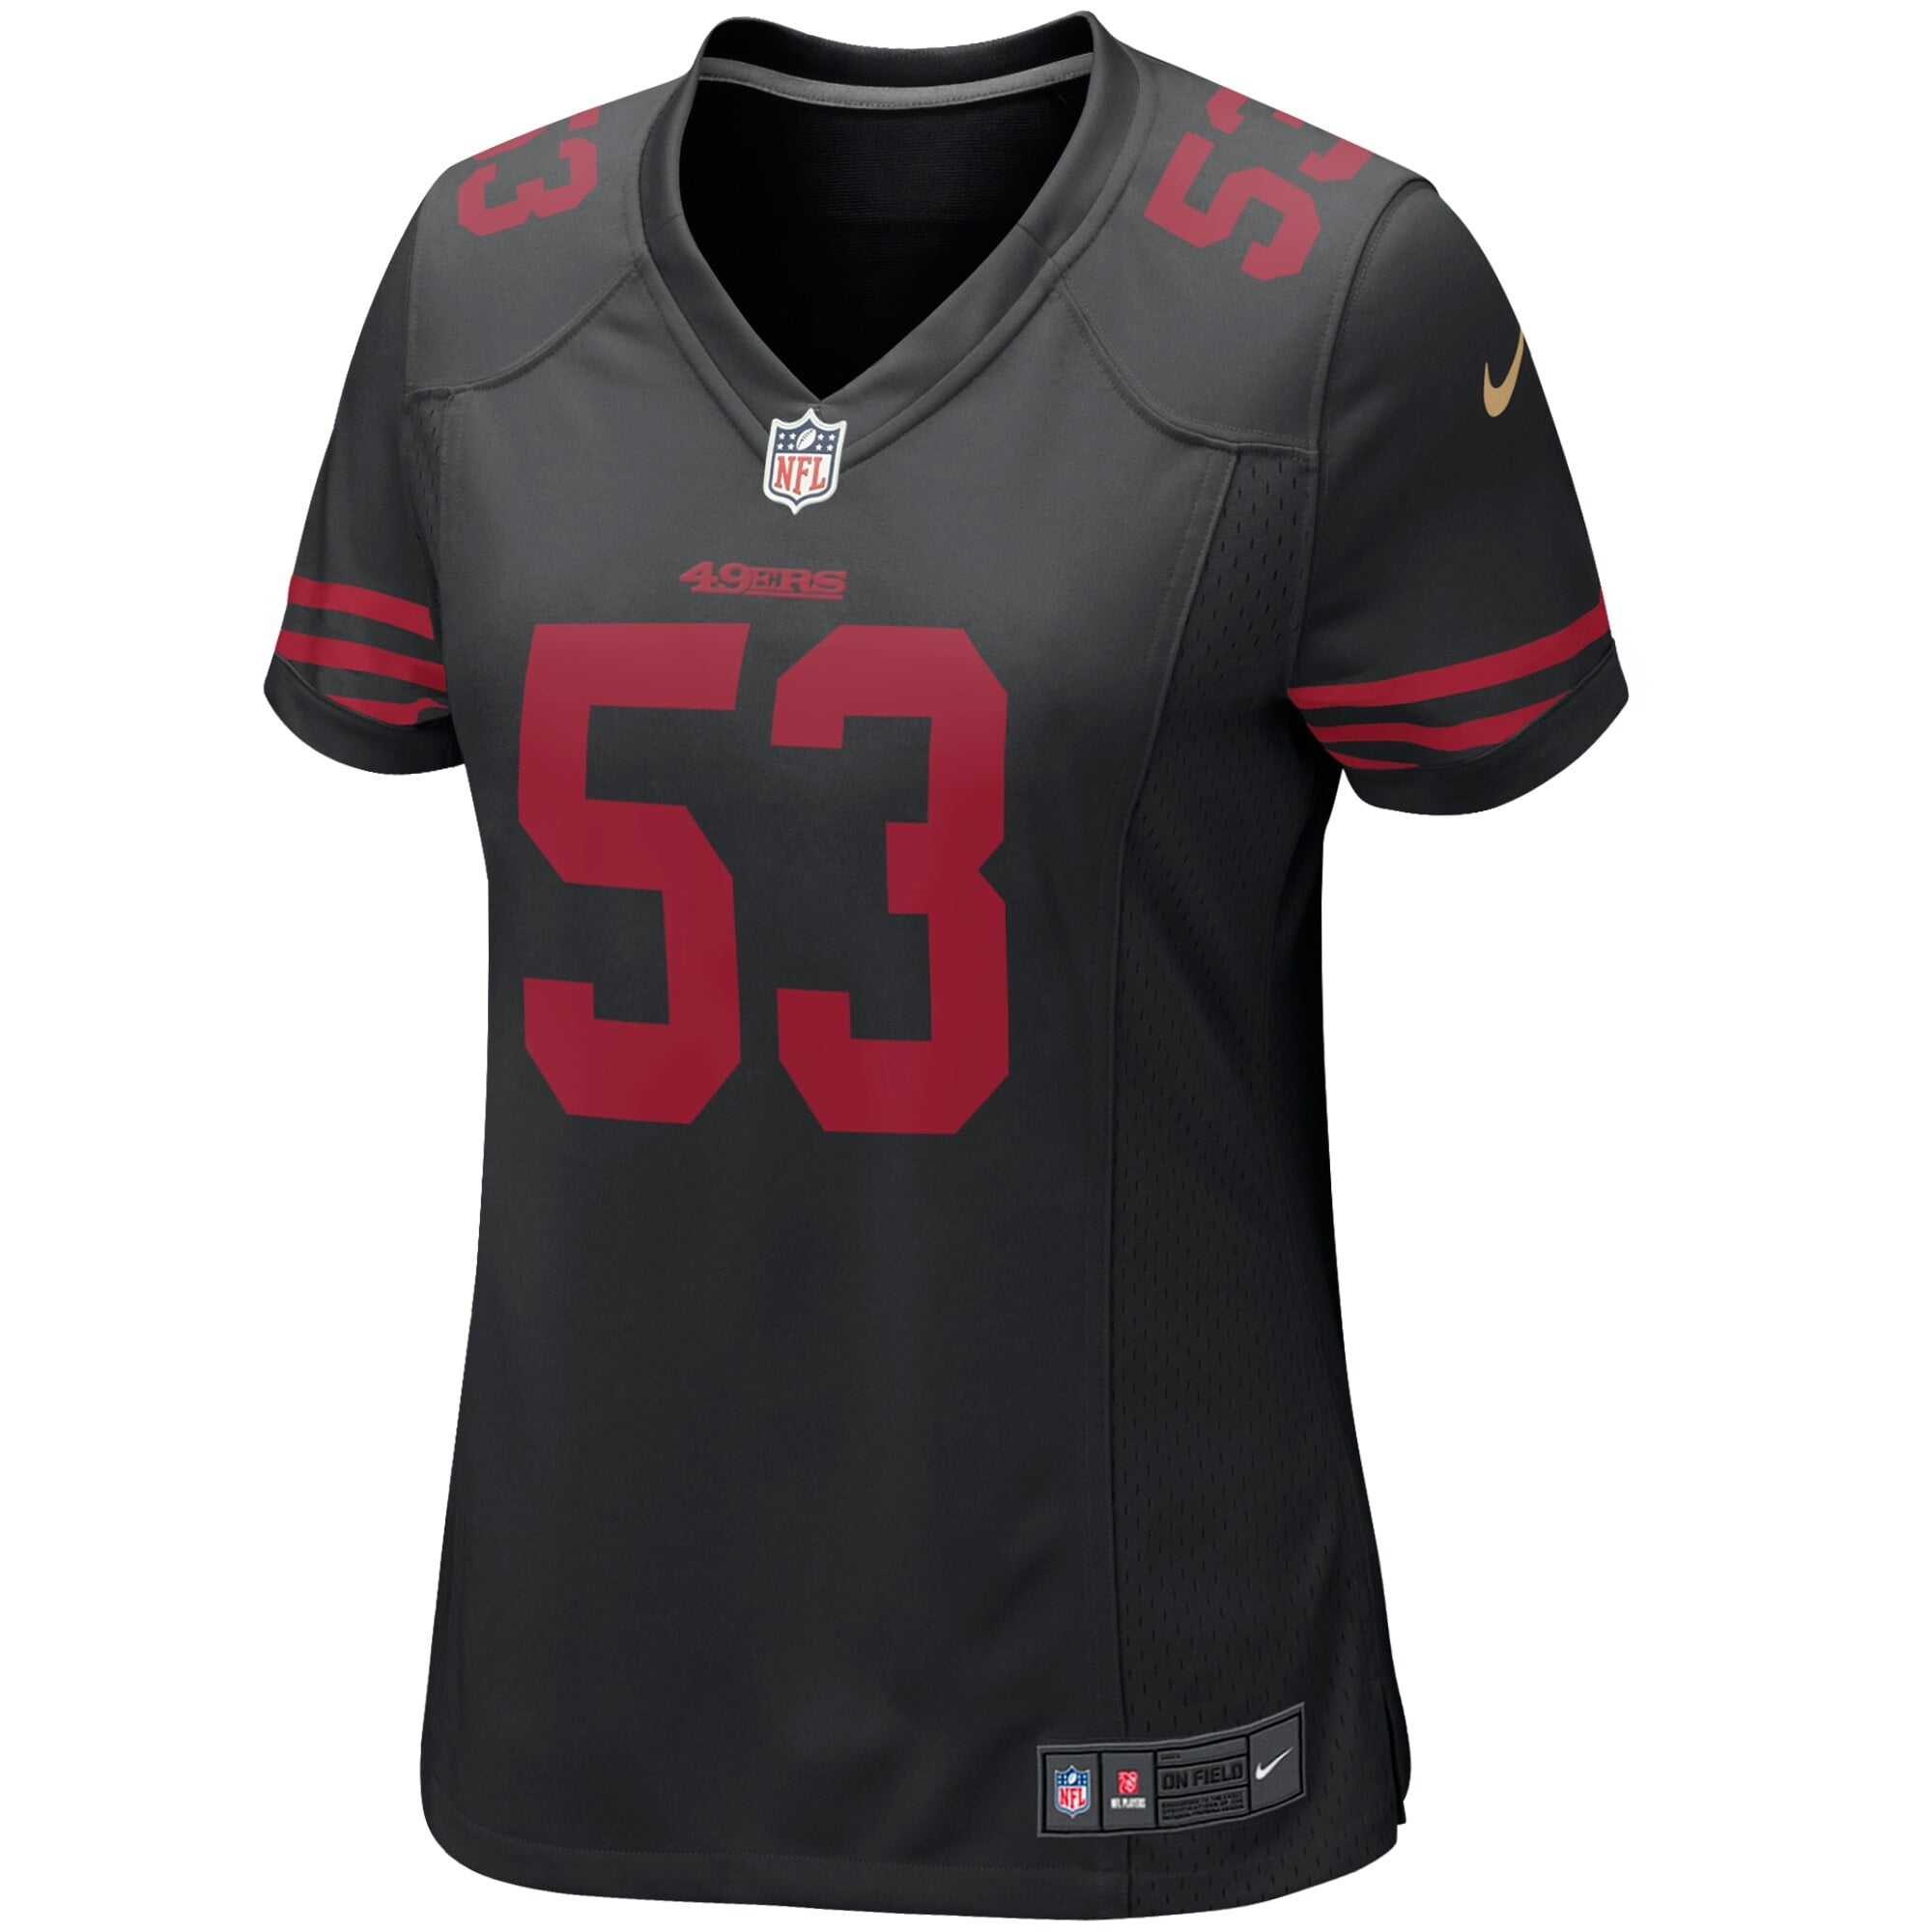 navorro bowman jersey youth